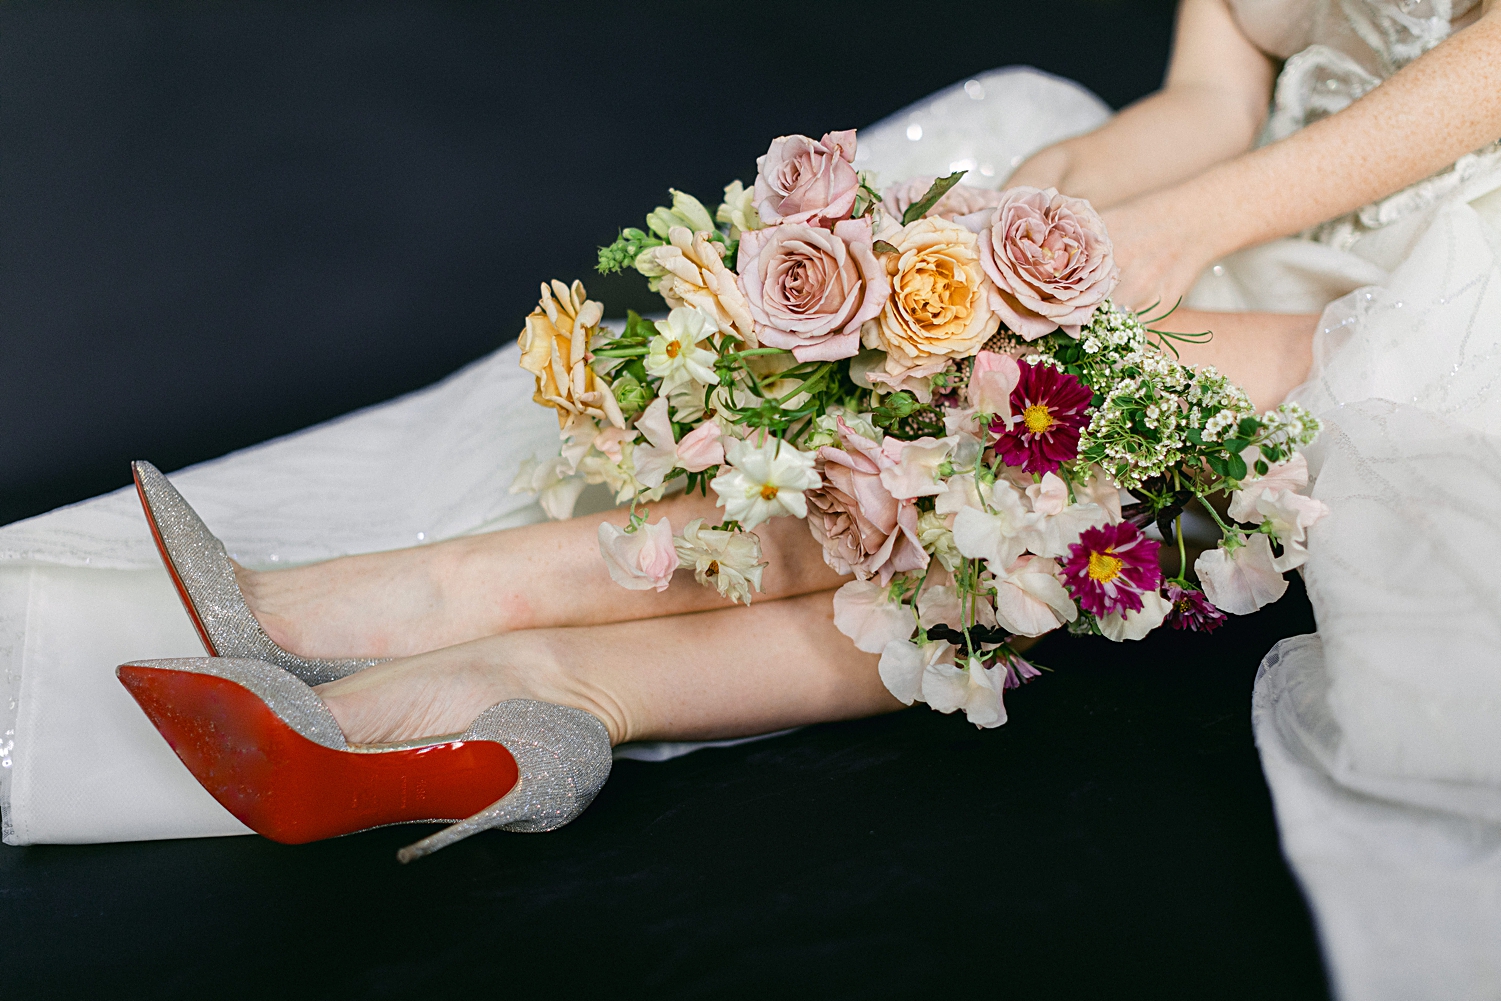 Bride in sparkling white wedding and high heels gown sitting with colorful floral bouquet